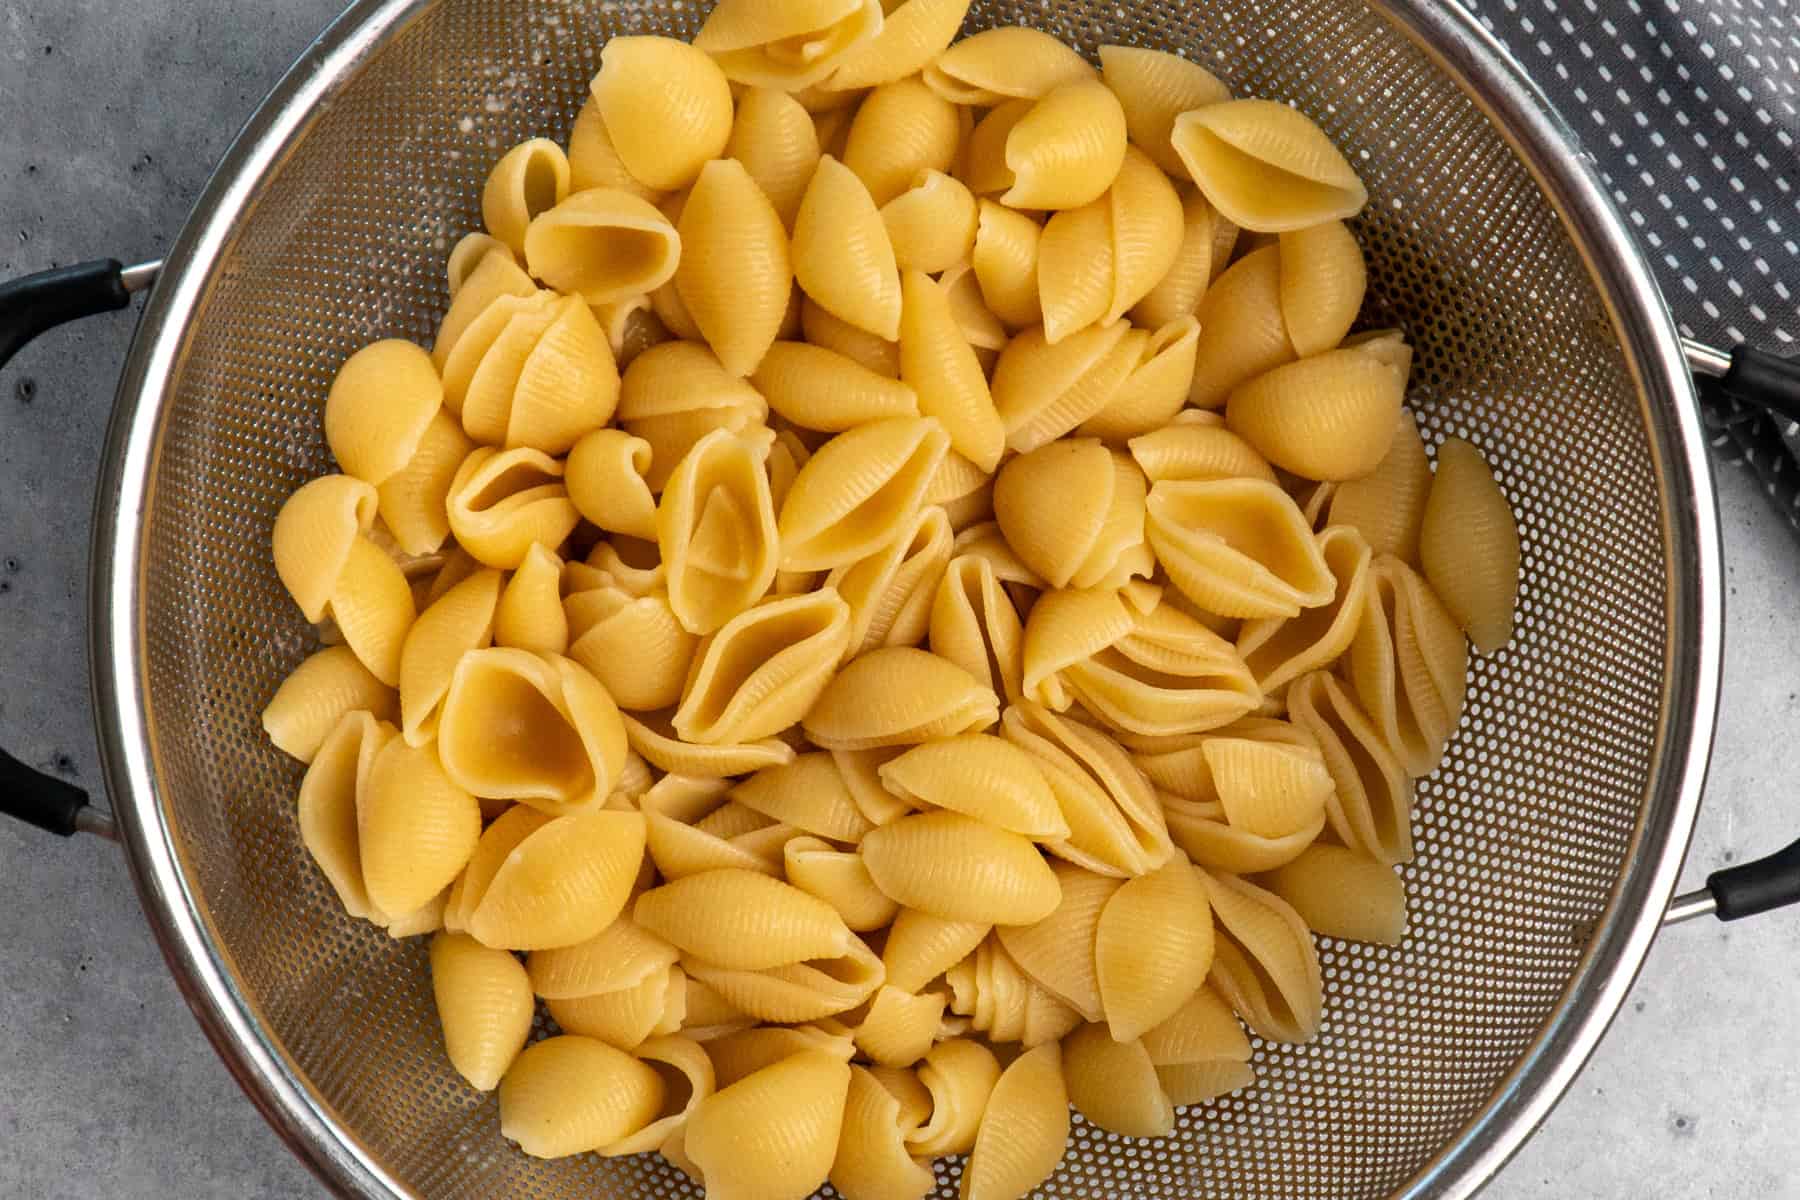 Cooked macaroni shells in a strainer.